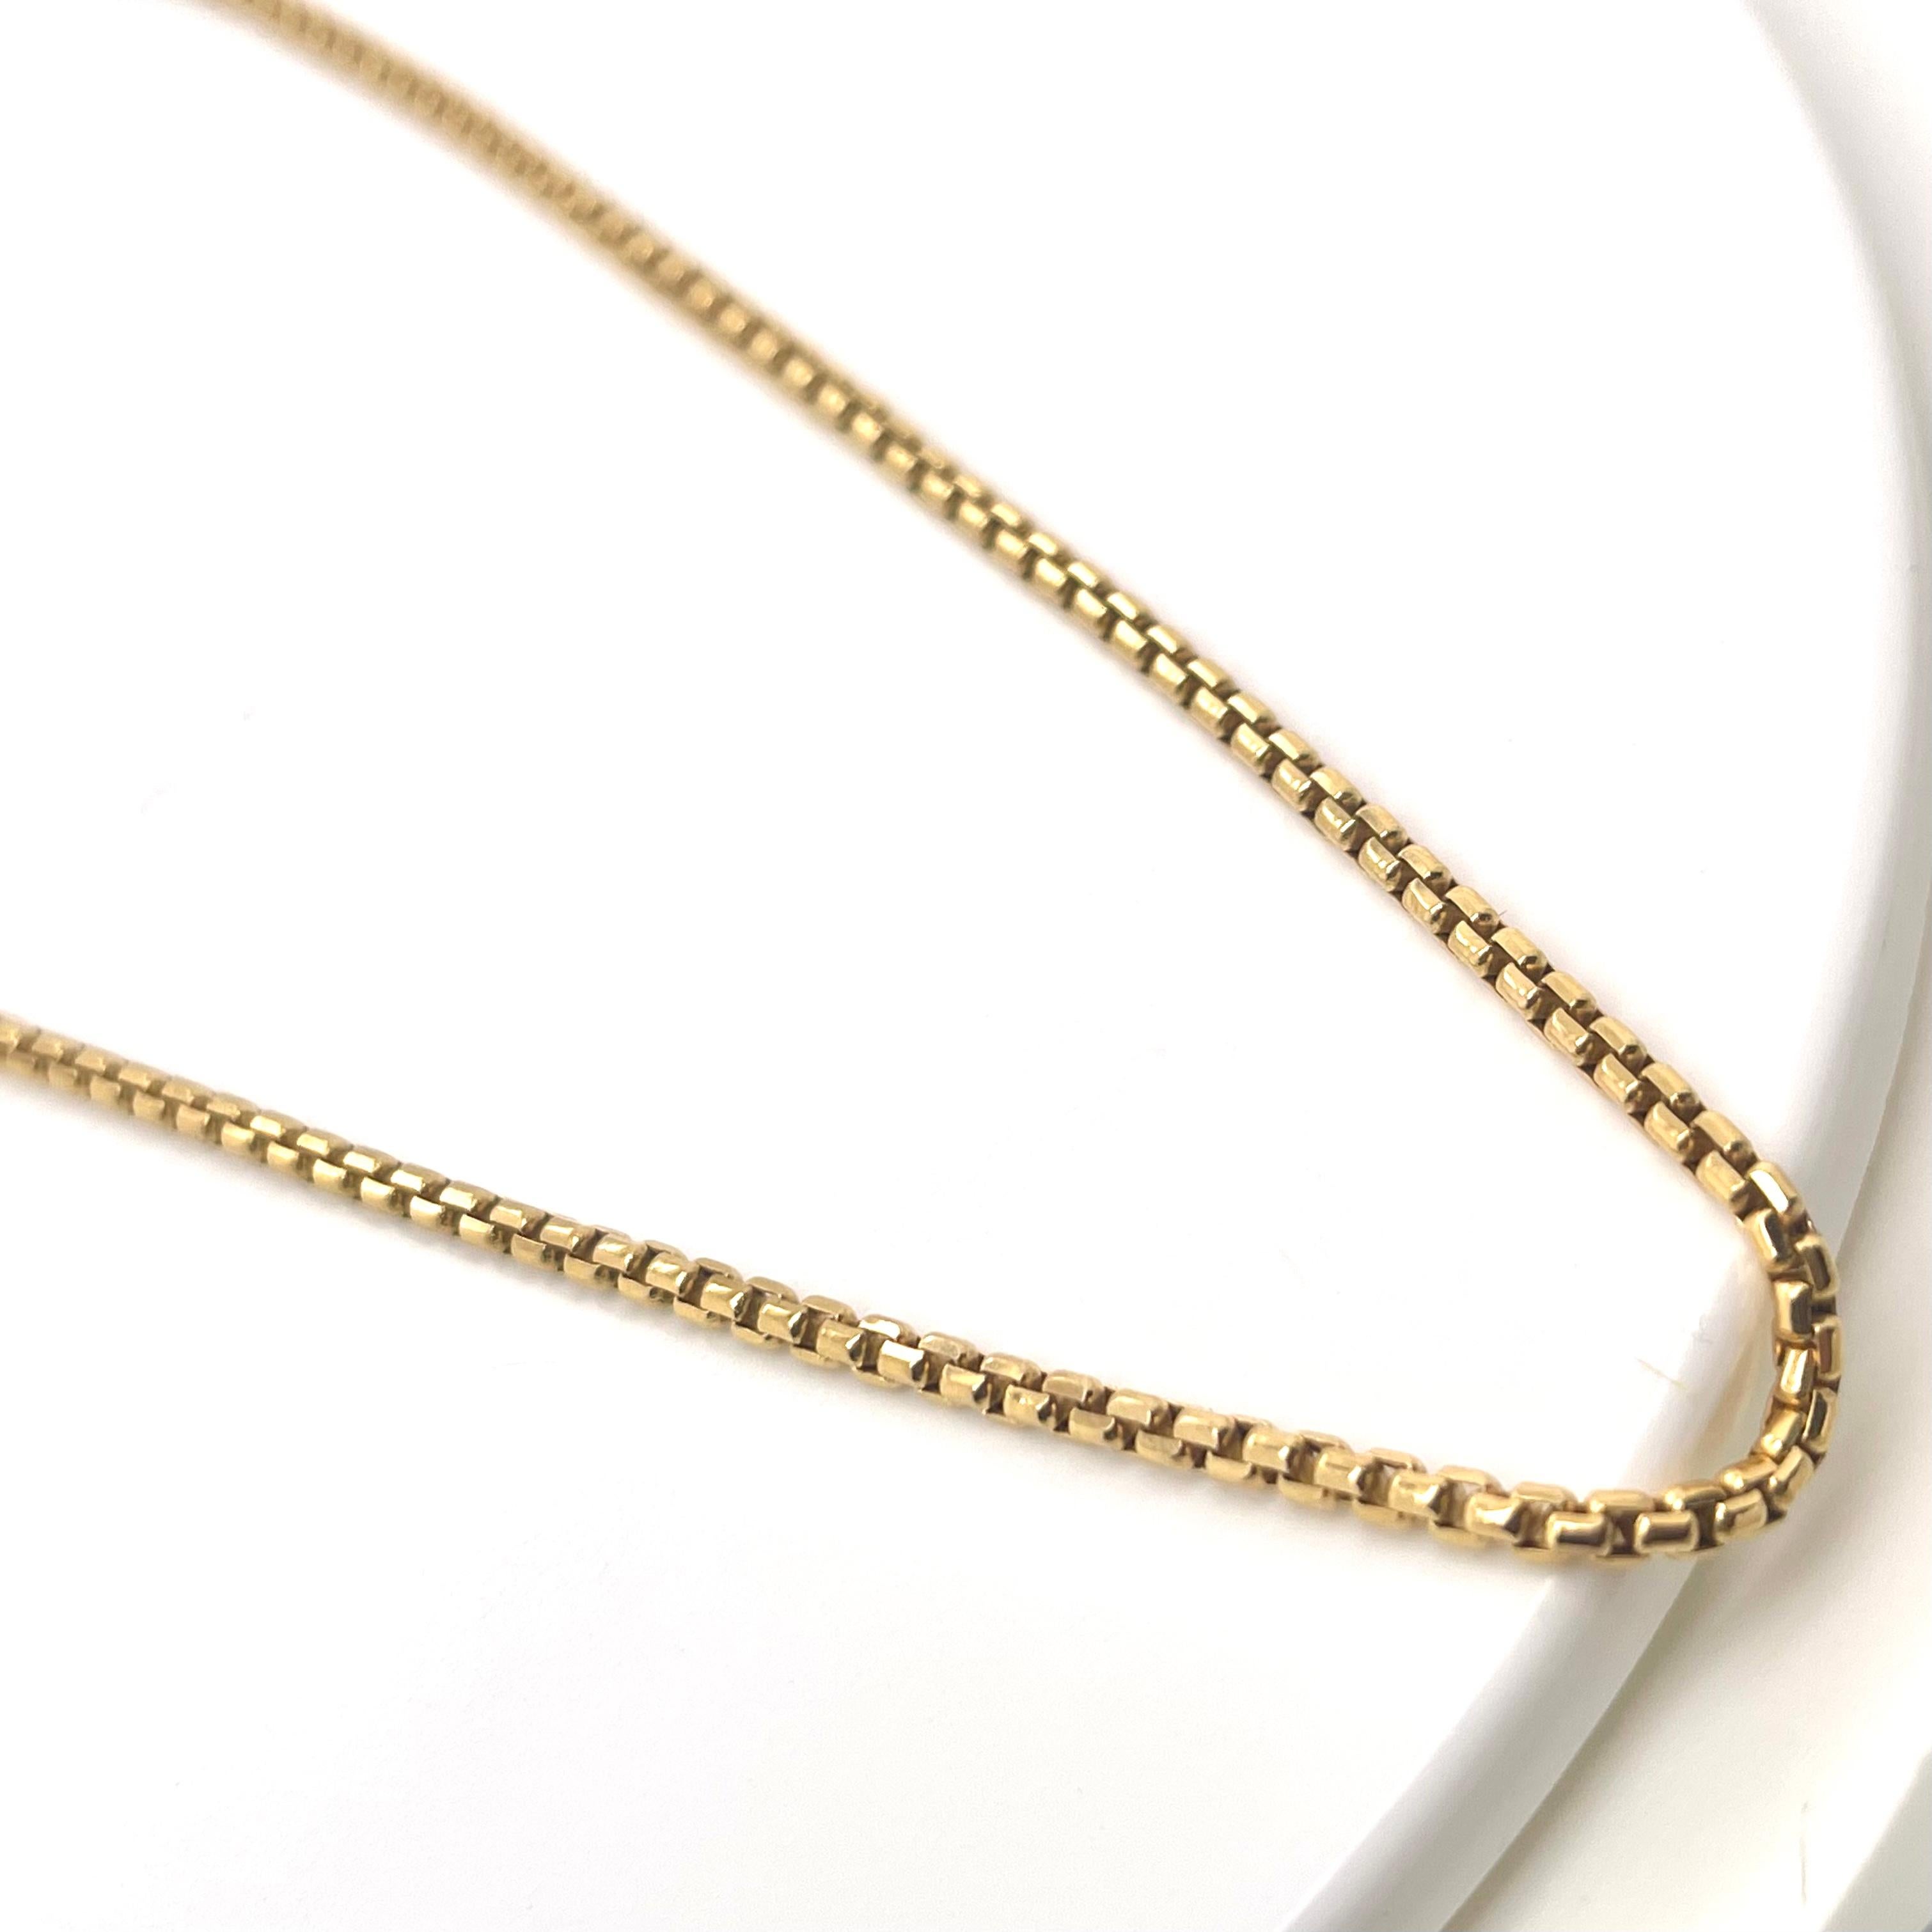 Style: Round Box Chain Necklace

Metal: Yellow Gold 

Metal Purity: 14K 

Necklace Length: 24 in 

Total Weight: 9.1 g

Signature: 14k

Includes: 24 Month Brilliance Jewels Warranty

                 Brilliance Jewels Packaging